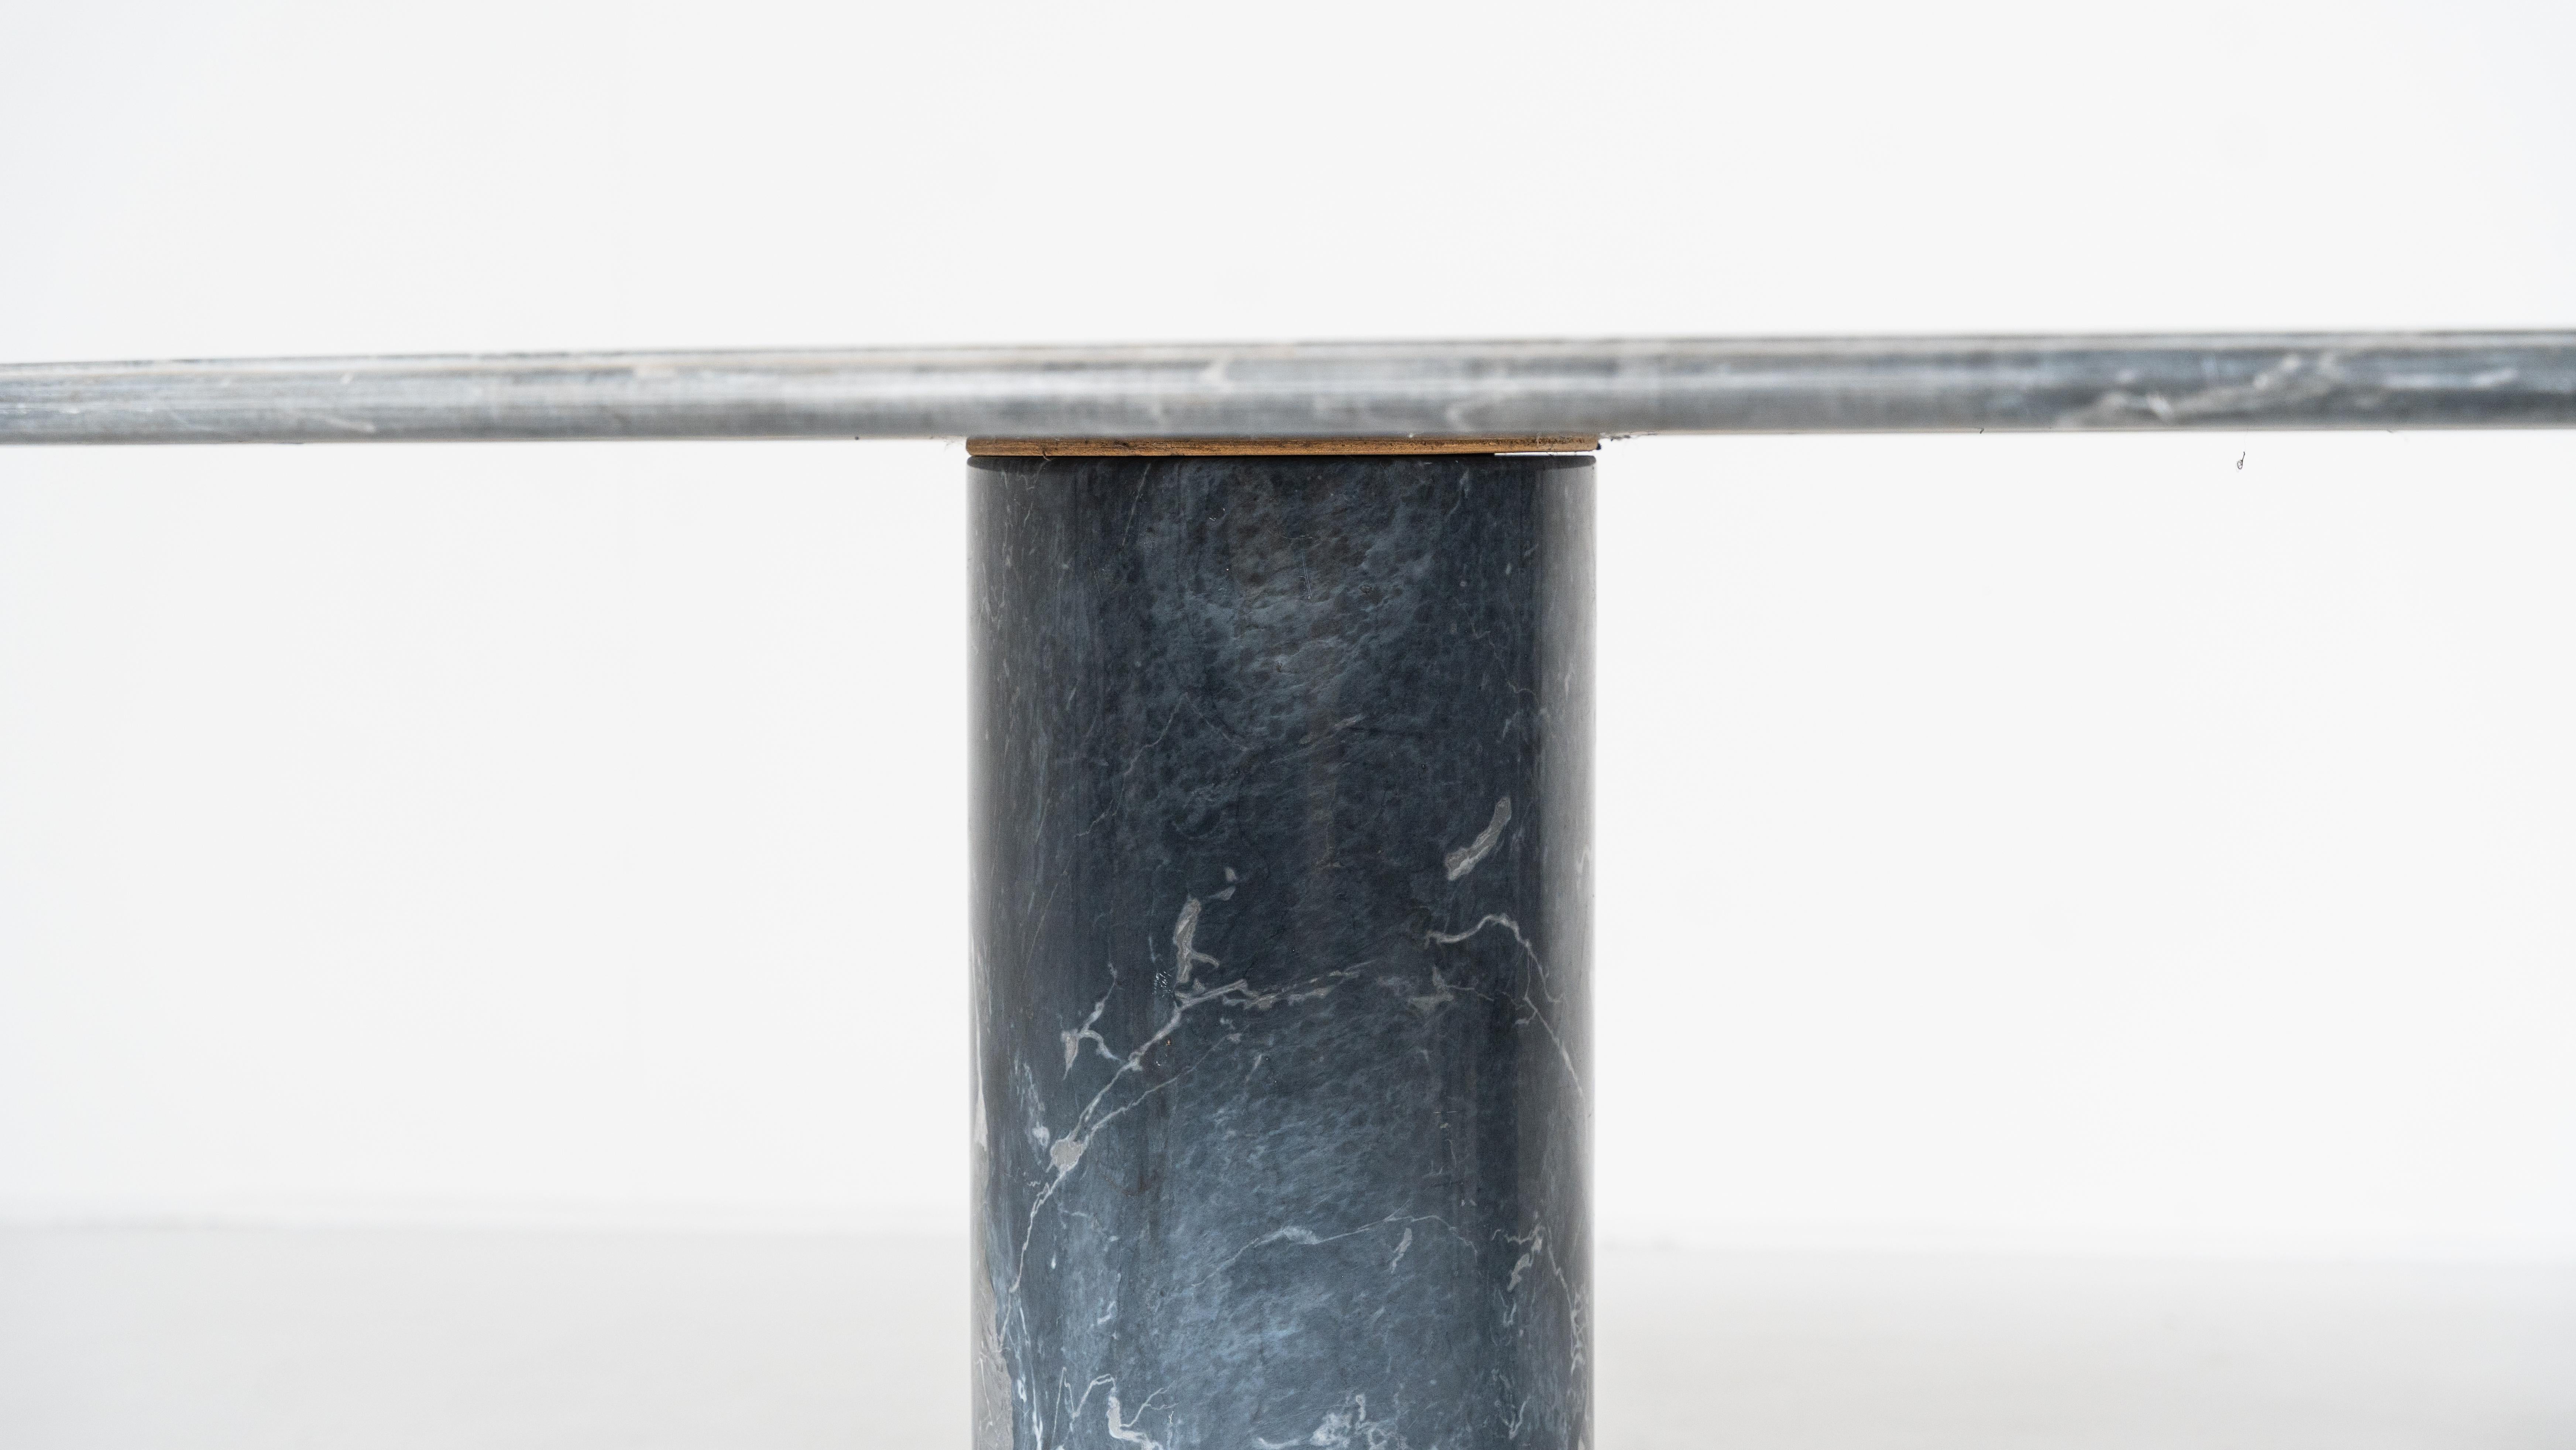 Ovale del Giardiniere Table by Achille Castiglioni for Upgroup, Marble, 1980s For Sale 7